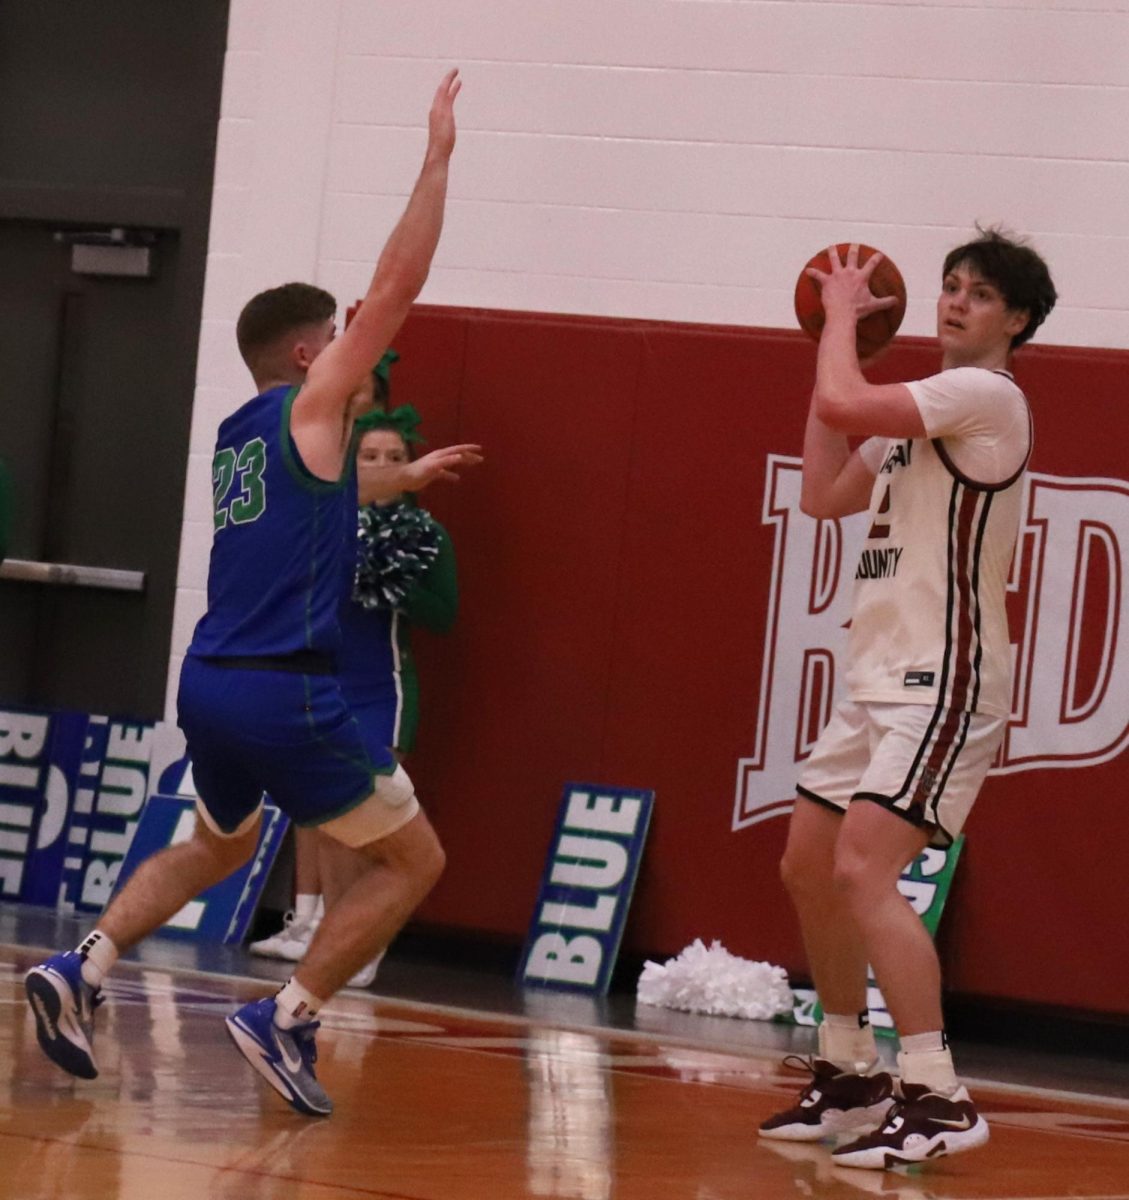 Harlan County guard Trent Noah prepared to make a pass in Saturdays game against North Laurel. Noah had 30 points and 12 rebounds as the Bears improved to 15-2 with a 65-58 victory.